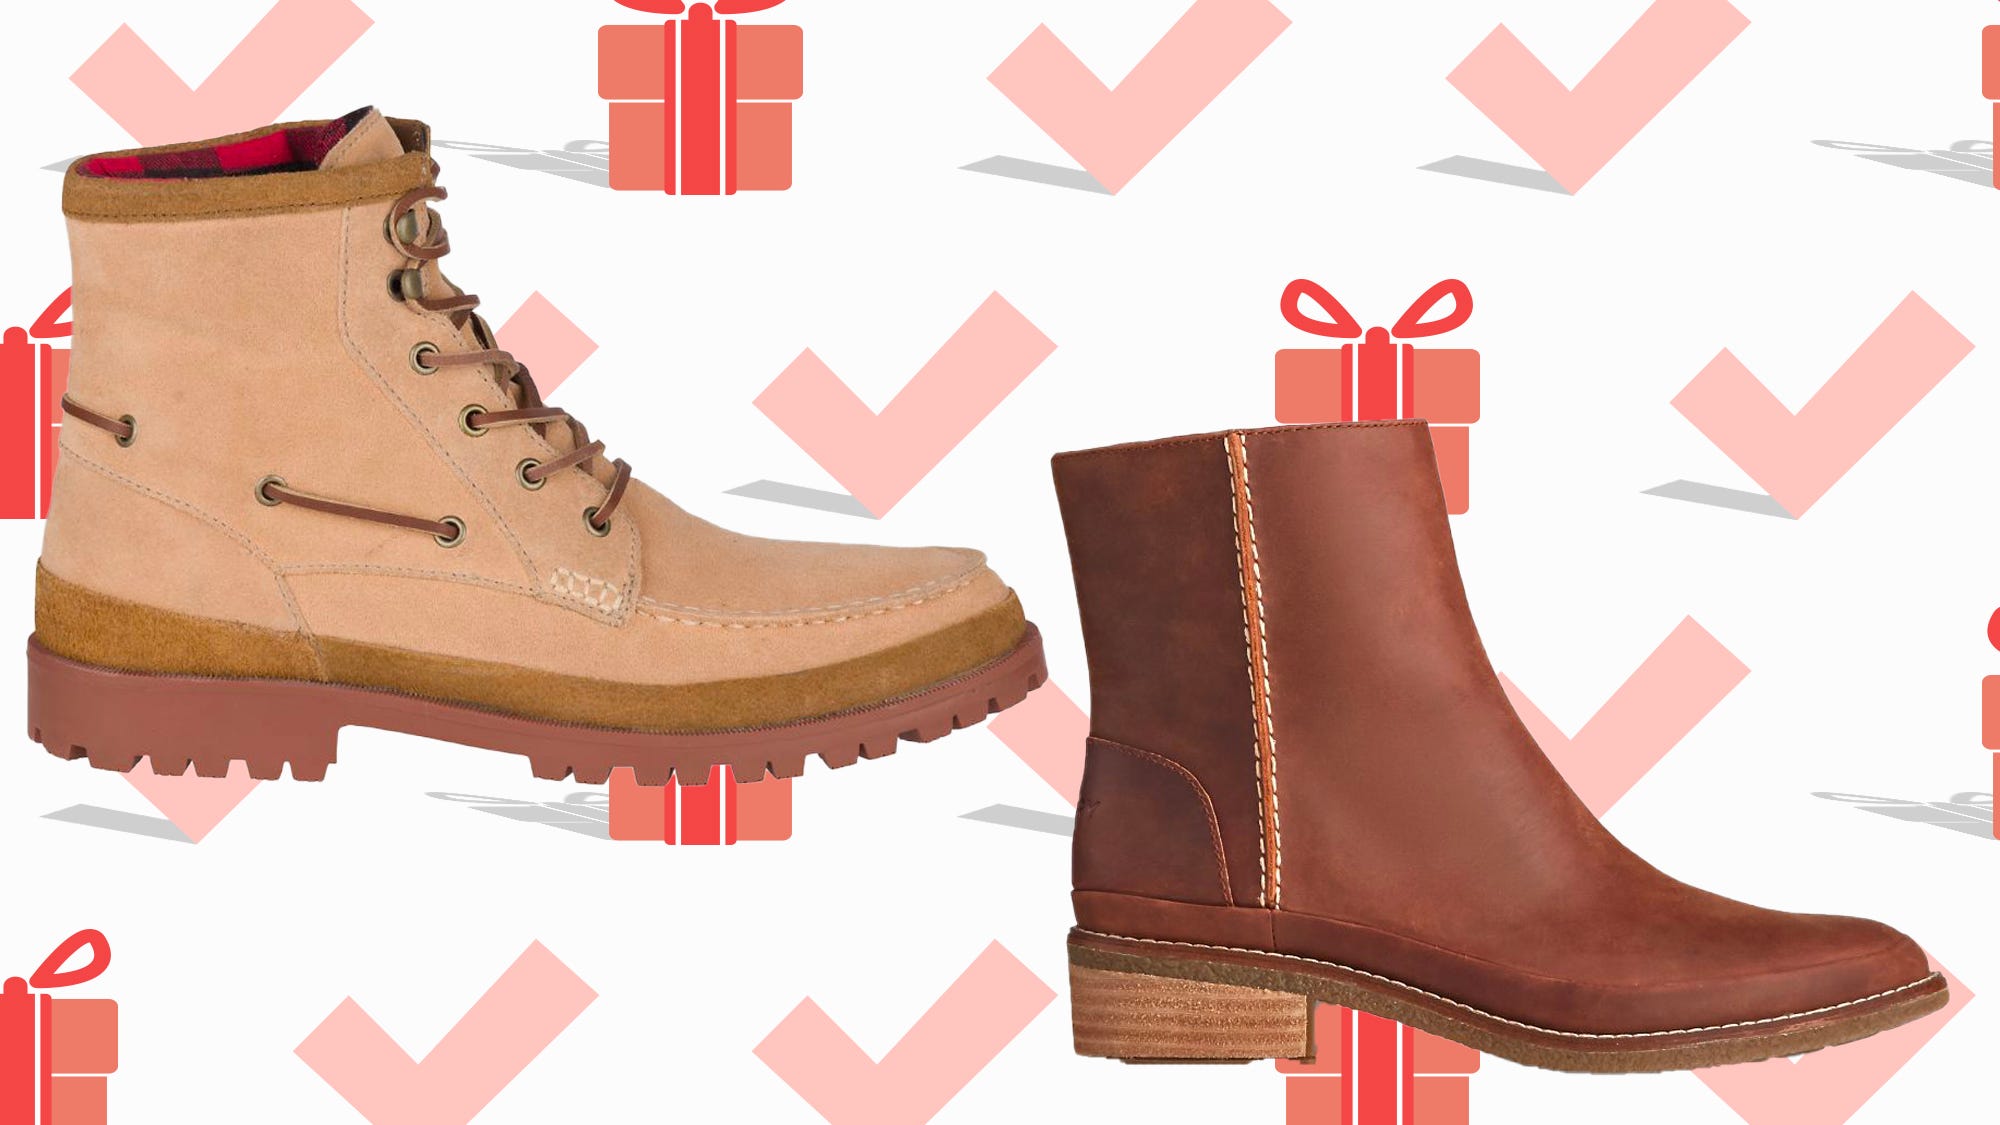 sperry duck boots black friday sale